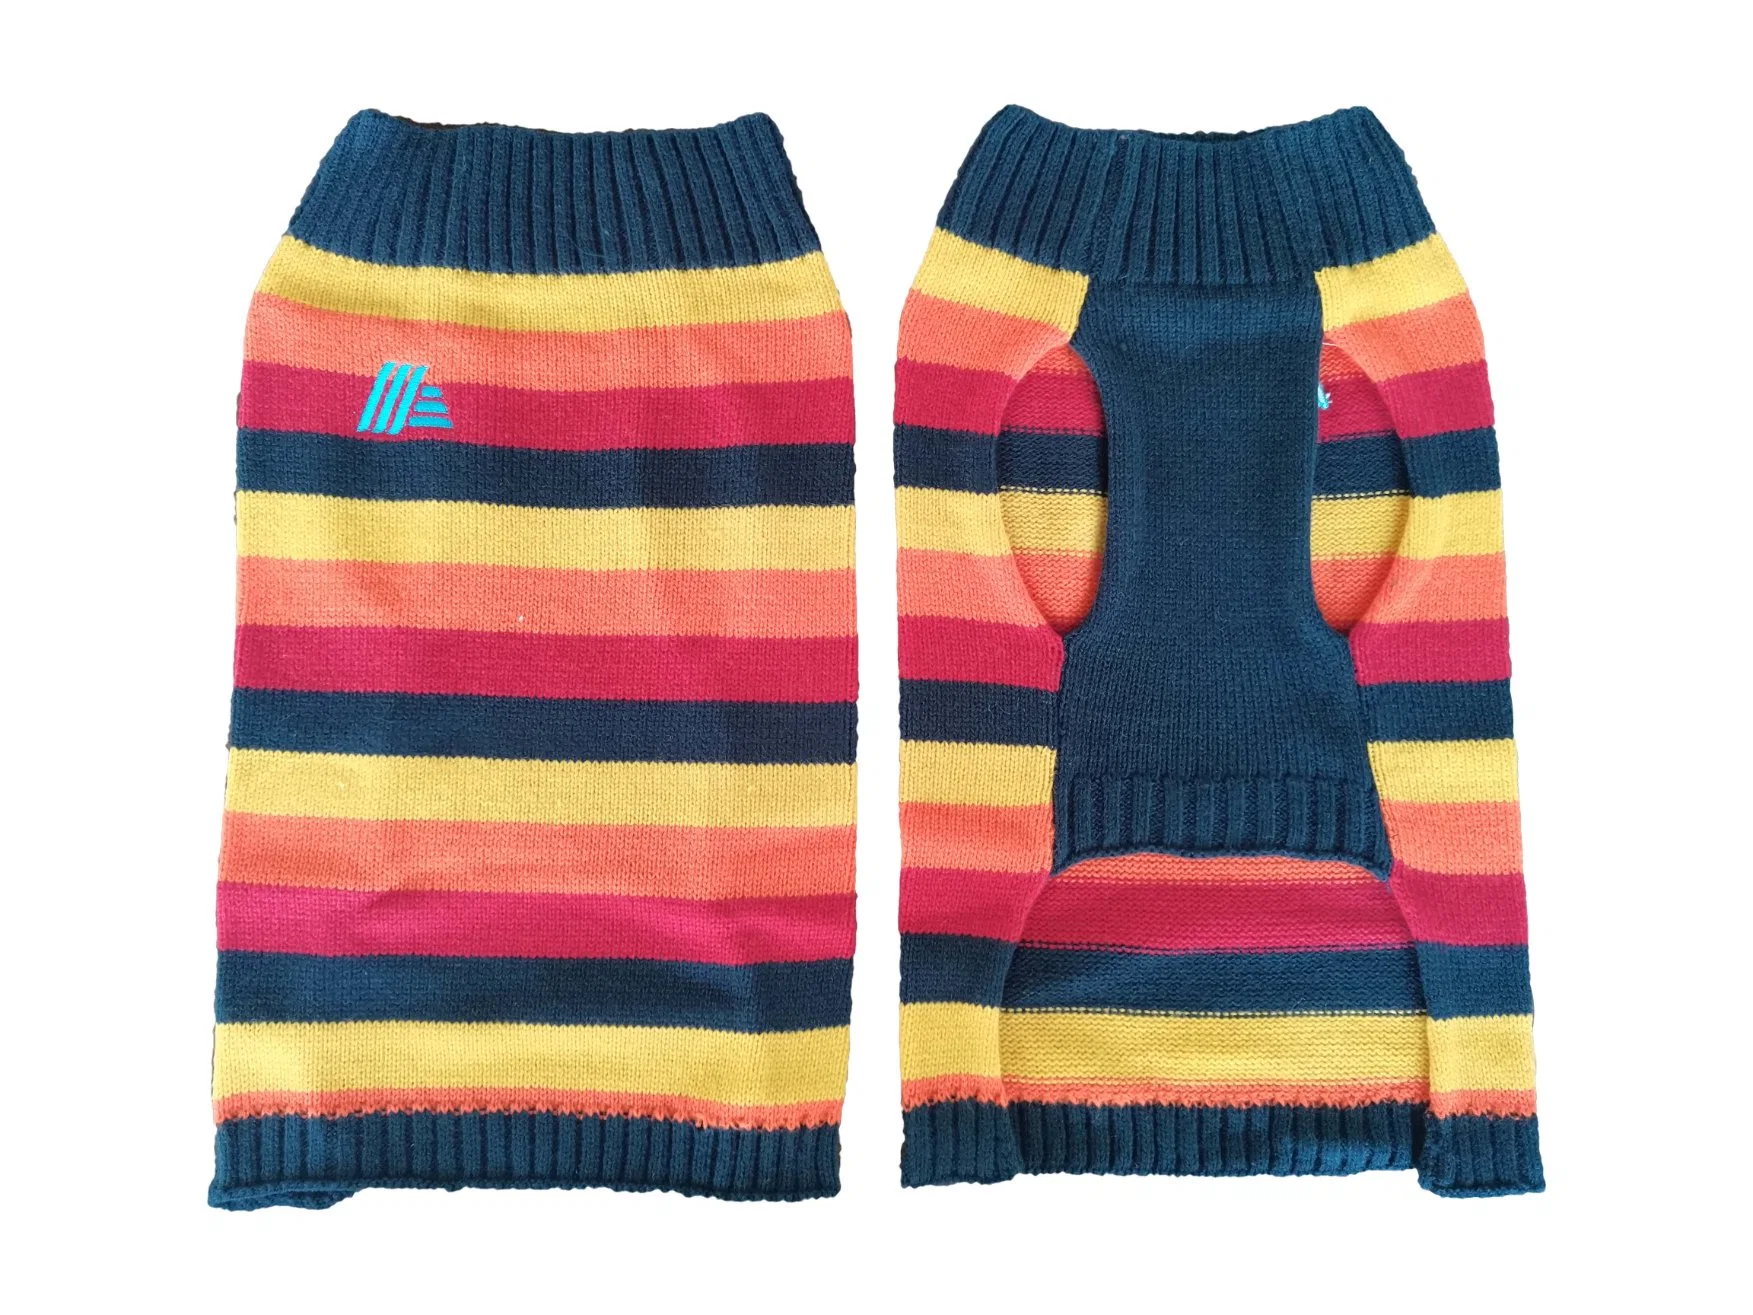 New-Arrival Quality Spring Stripe Pet Apparel Dog Cozy Knitted Sweater